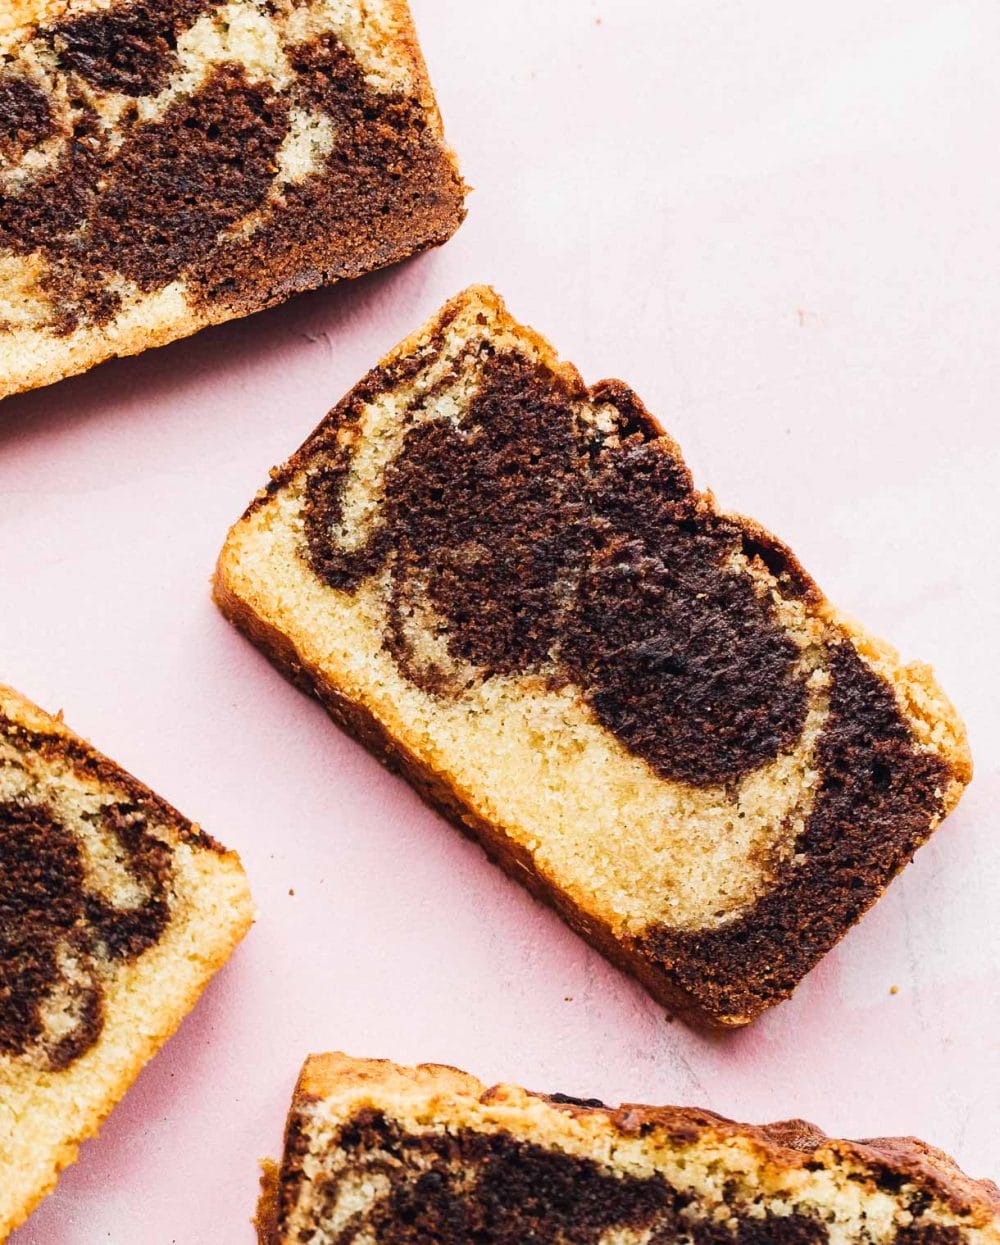 slices of gluten-free marble pound cake on pink background